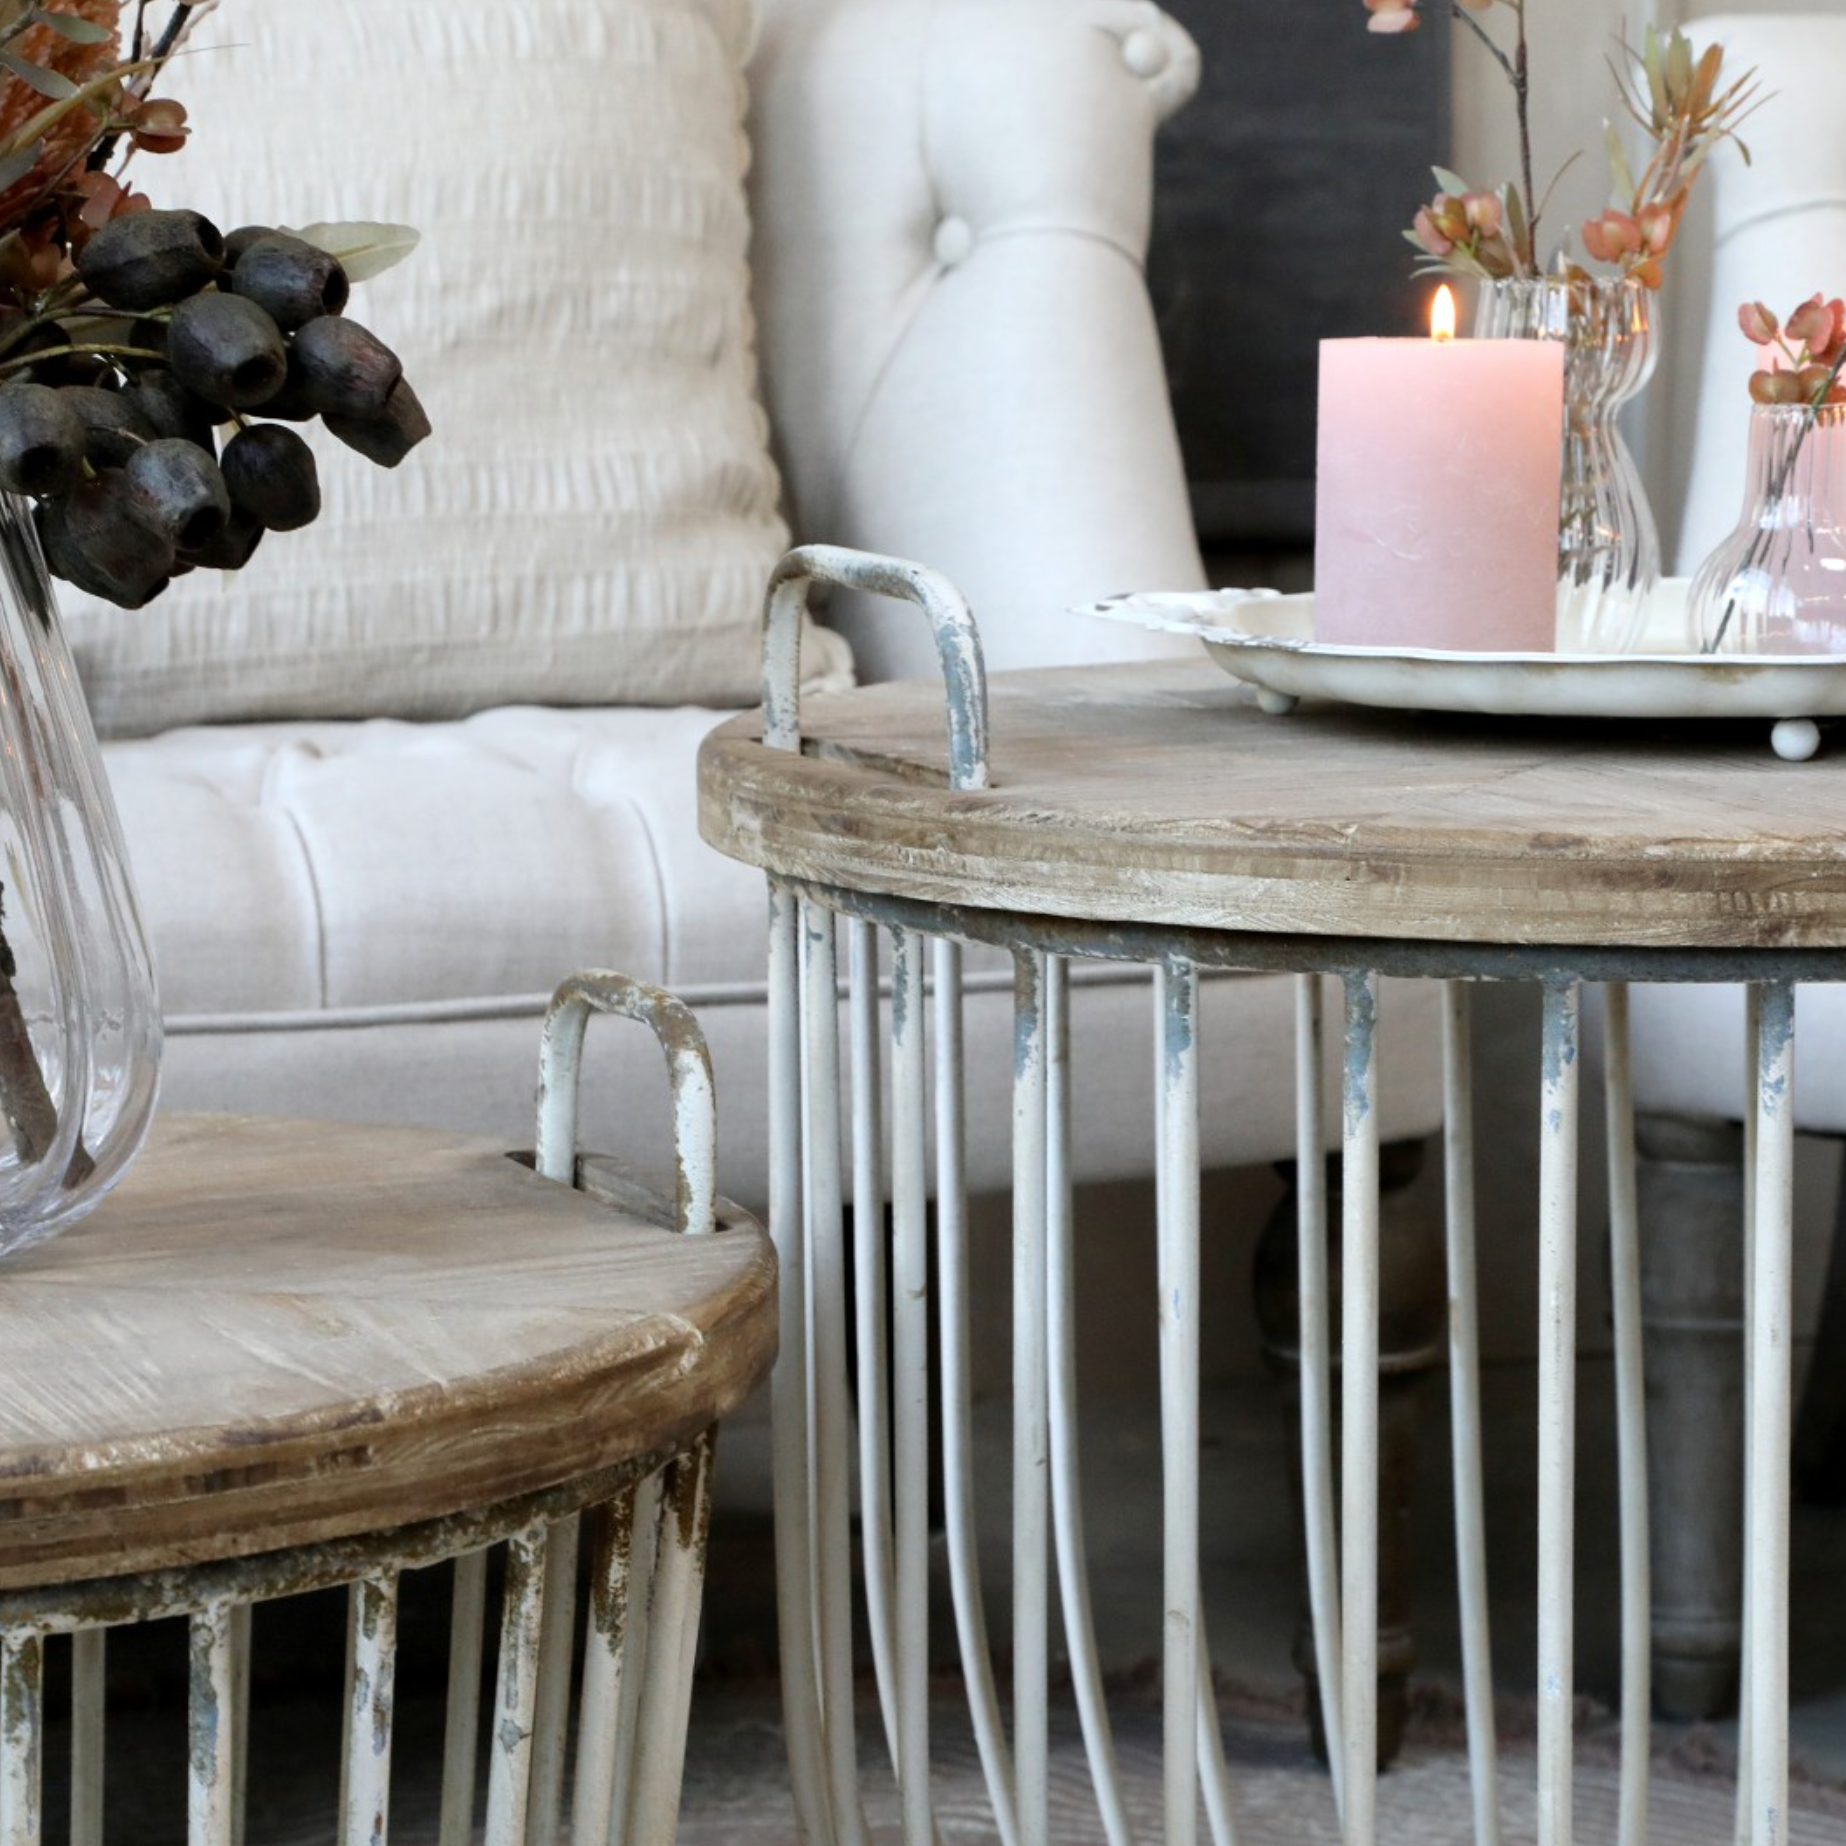 a close up of our rustic coffee tables set with pink decor.